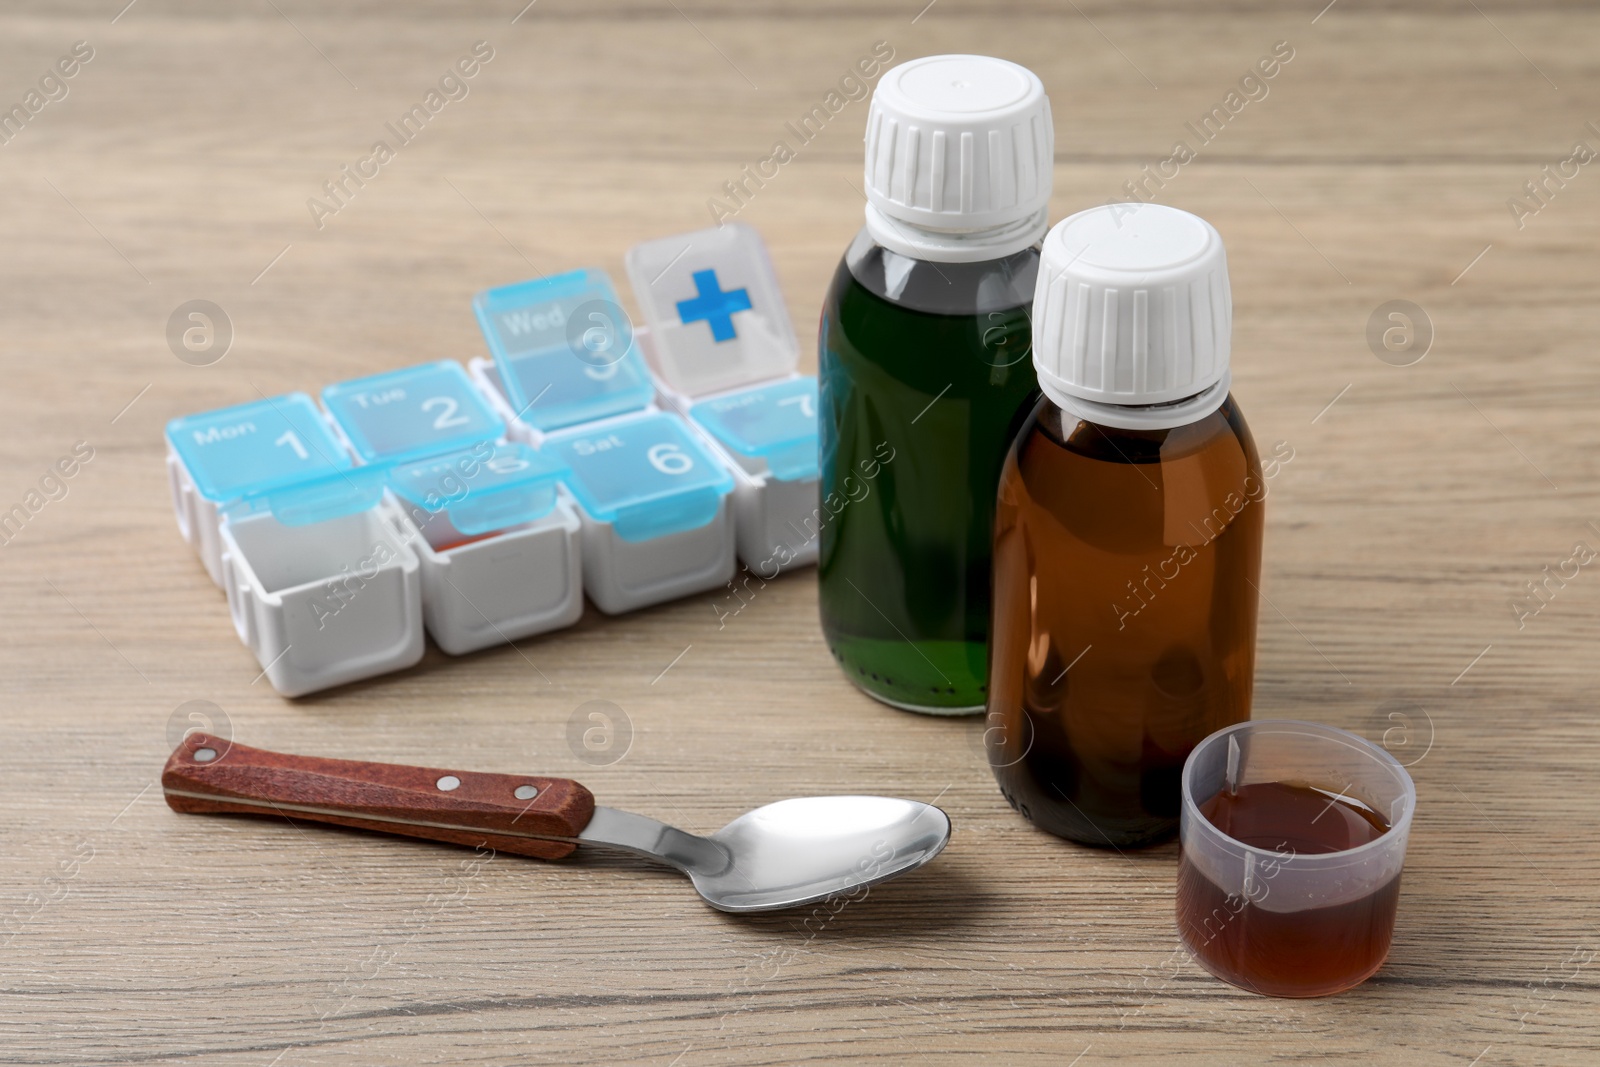 Photo of Bottles of syrup, measuring cup, spoon and weekly pill organizer on wooden table. Cold medicine